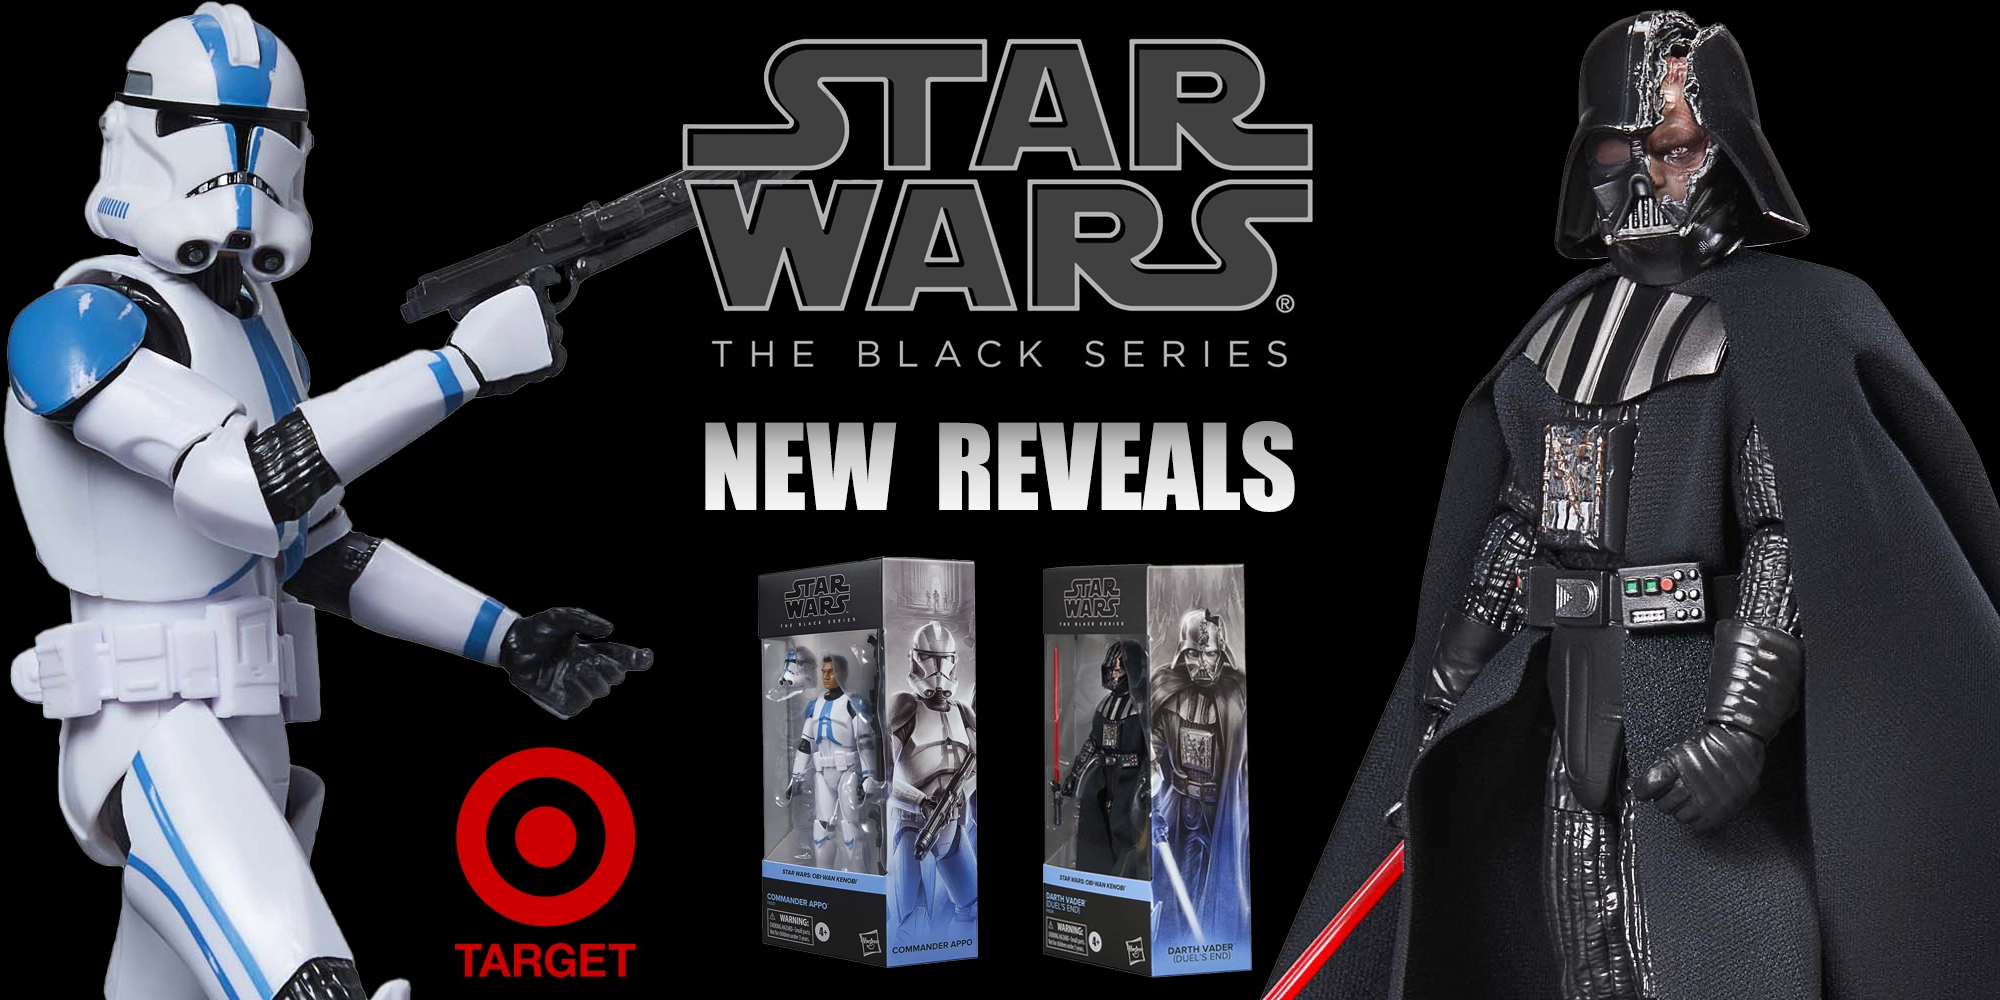 EXCLUSIVE REVEAL: Battle-Damaged Darth Vader & Commander Appo Figures for the Black Series!